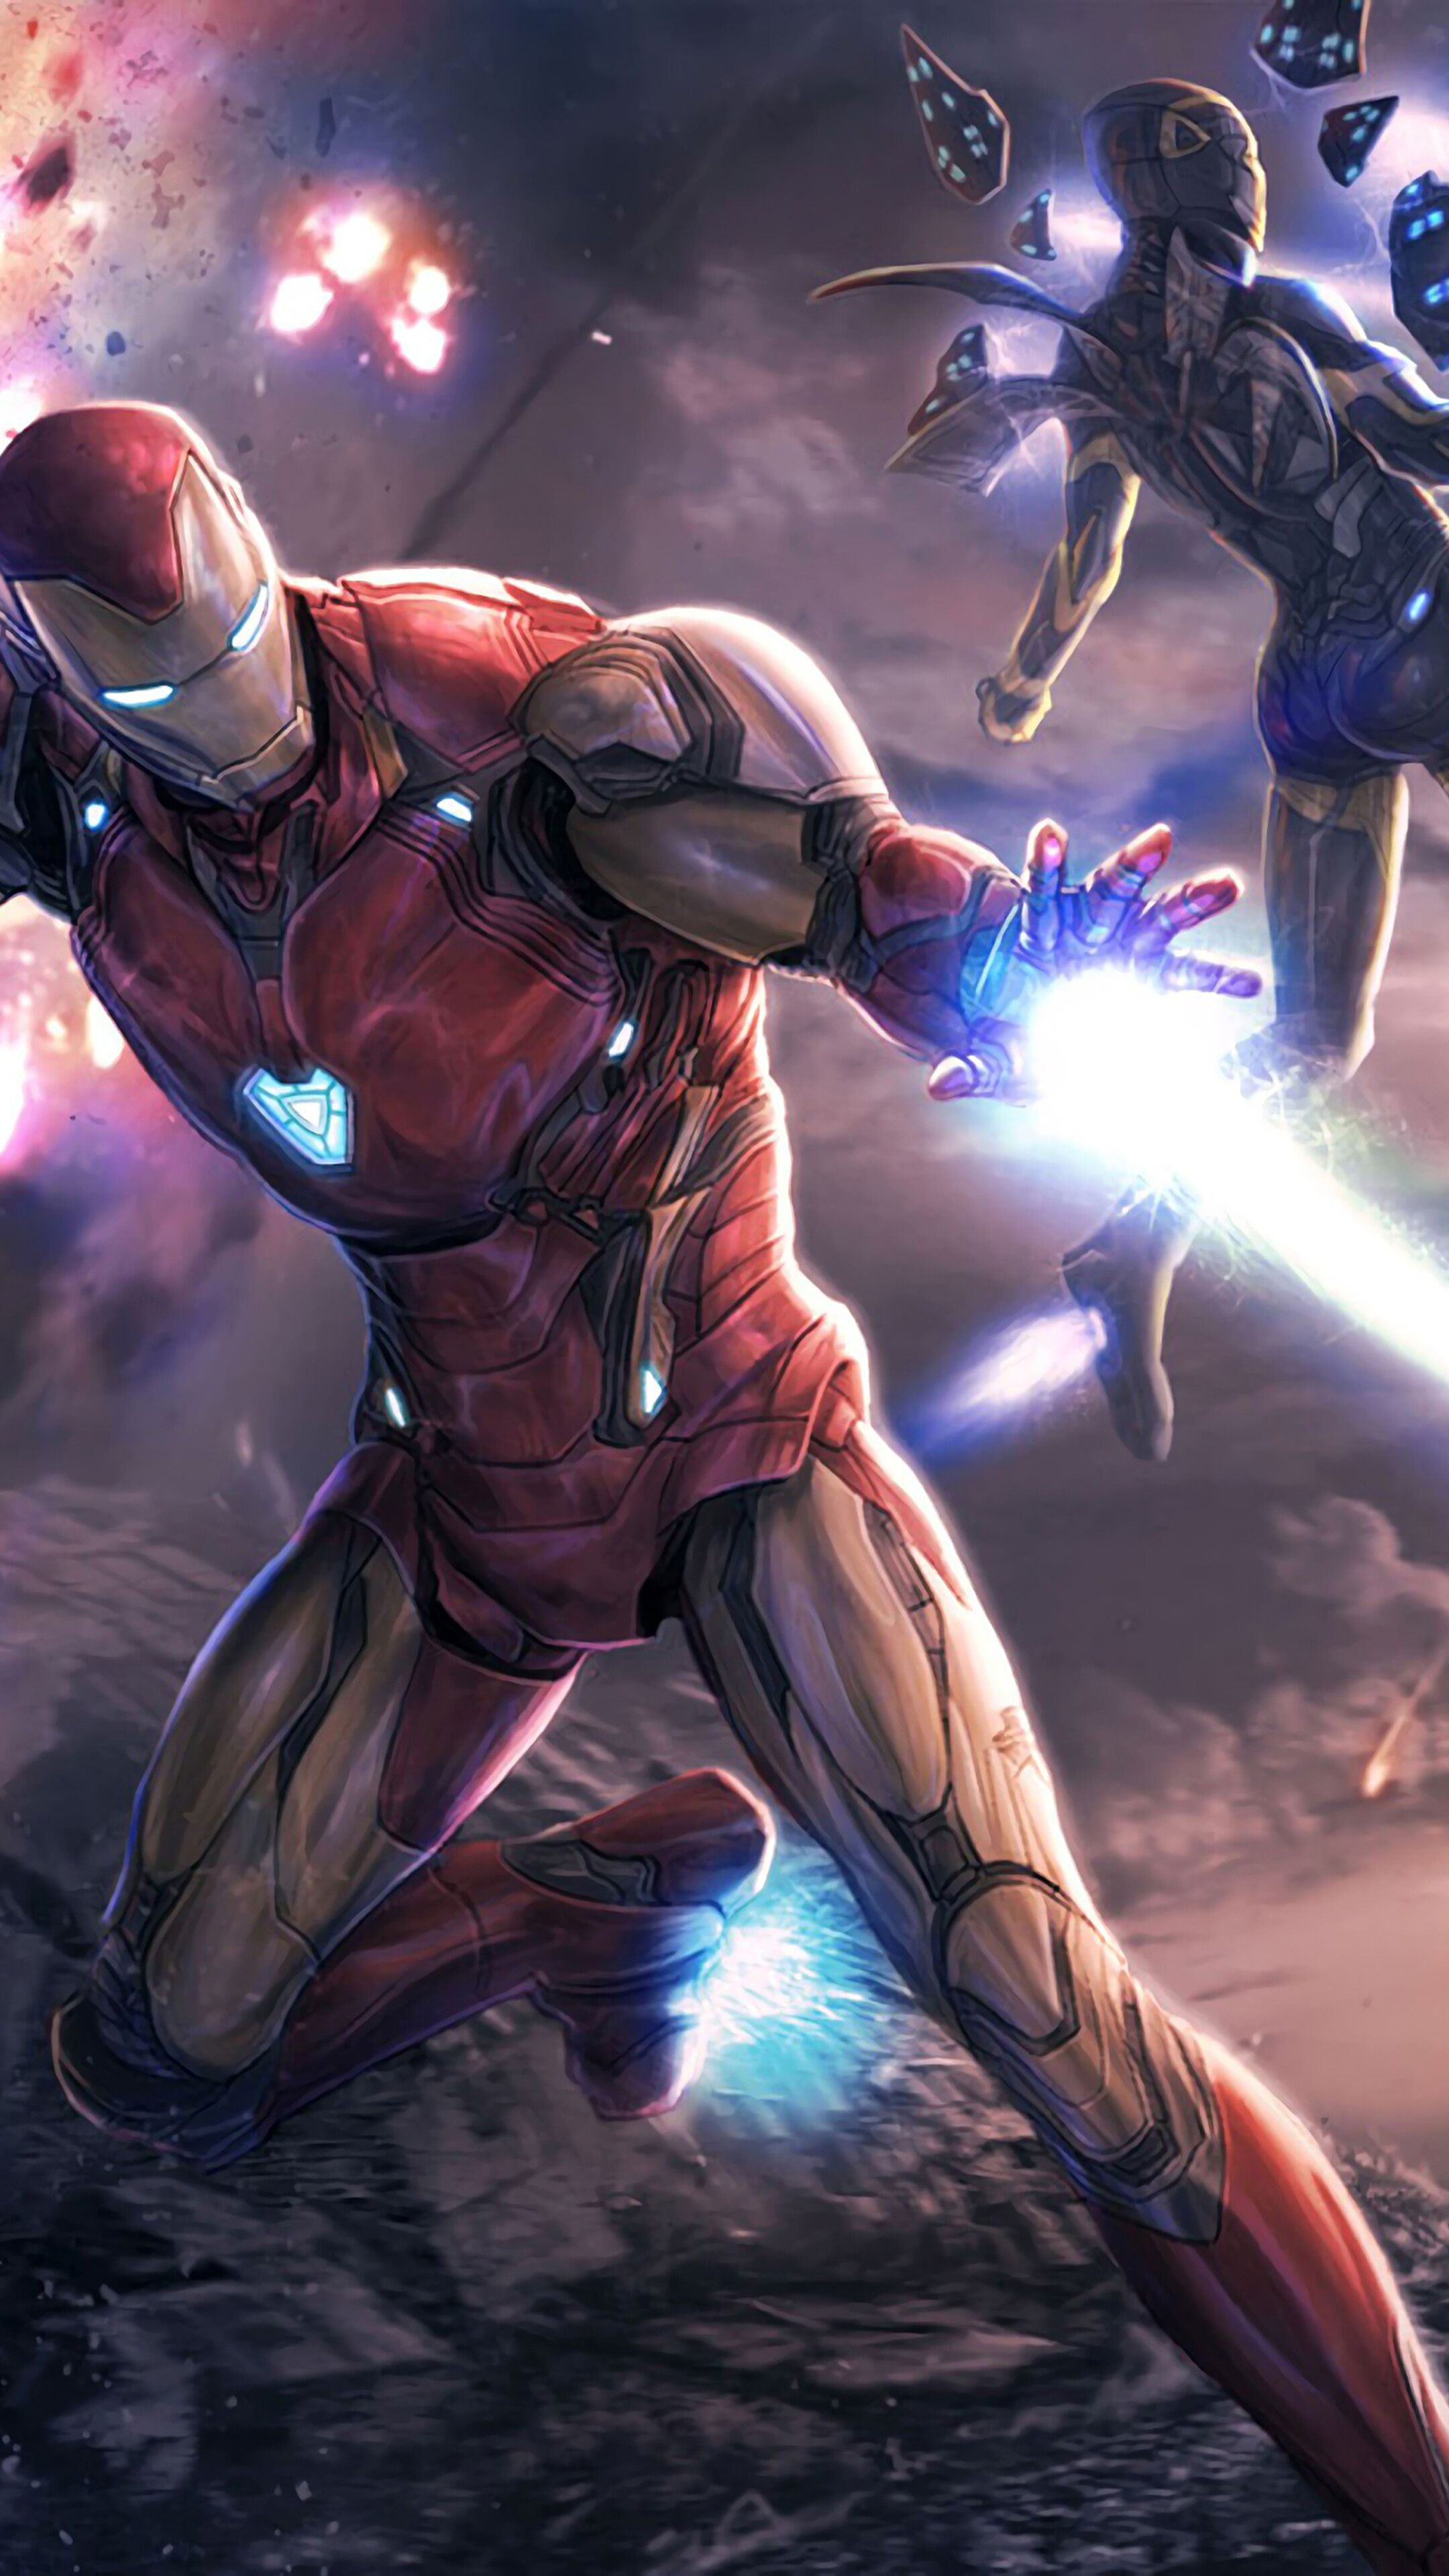 Iron Man, Iron Rescue, Avengers Endgame, 4K iPhone 6s, 6 HD Wallpaper, Image, Background, Photo and Pic. Iron man poster, Iron man art, Iron man wallpaper